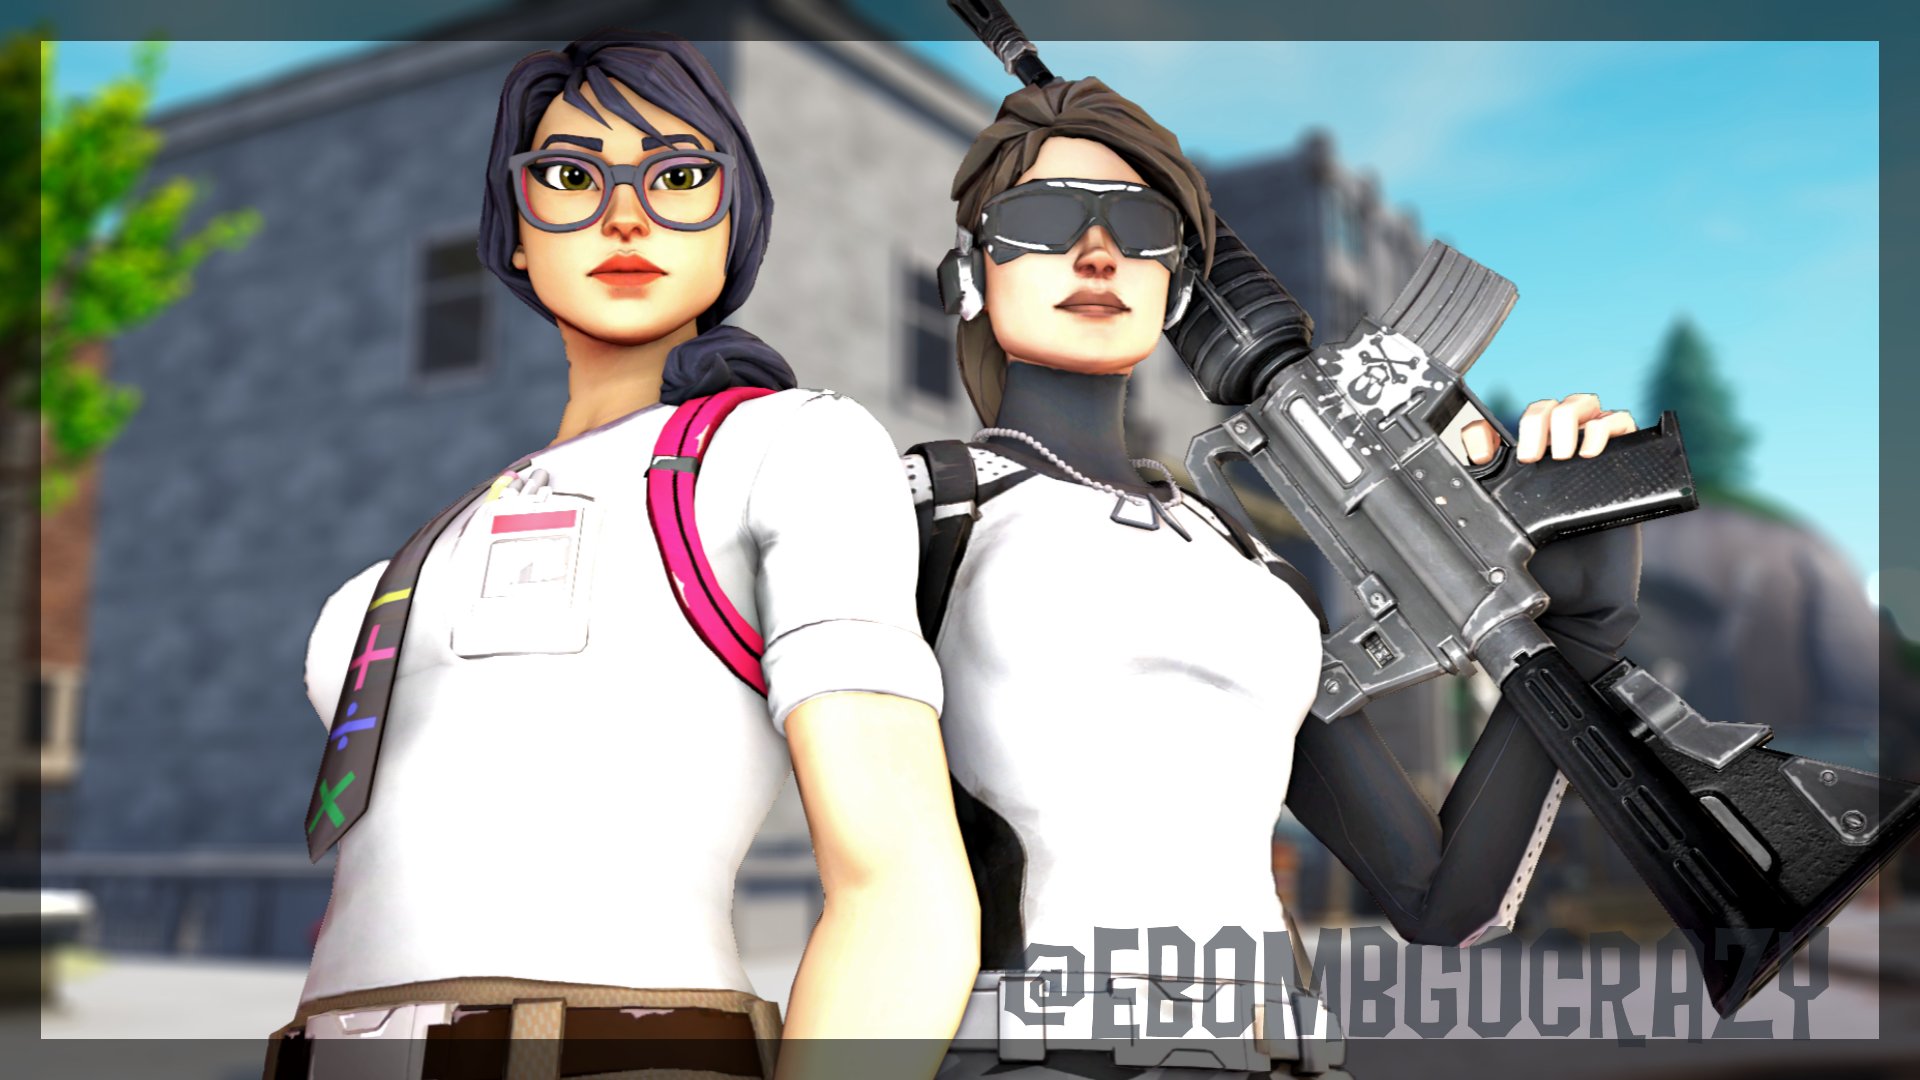 Ebomb The Best Duo Fortnite 3d Thumbnail Might Make This Free But For Right Now I M Charging 3 If You Want This Thumbnail Amp Are Appreciated T Co Mongtfsfg2